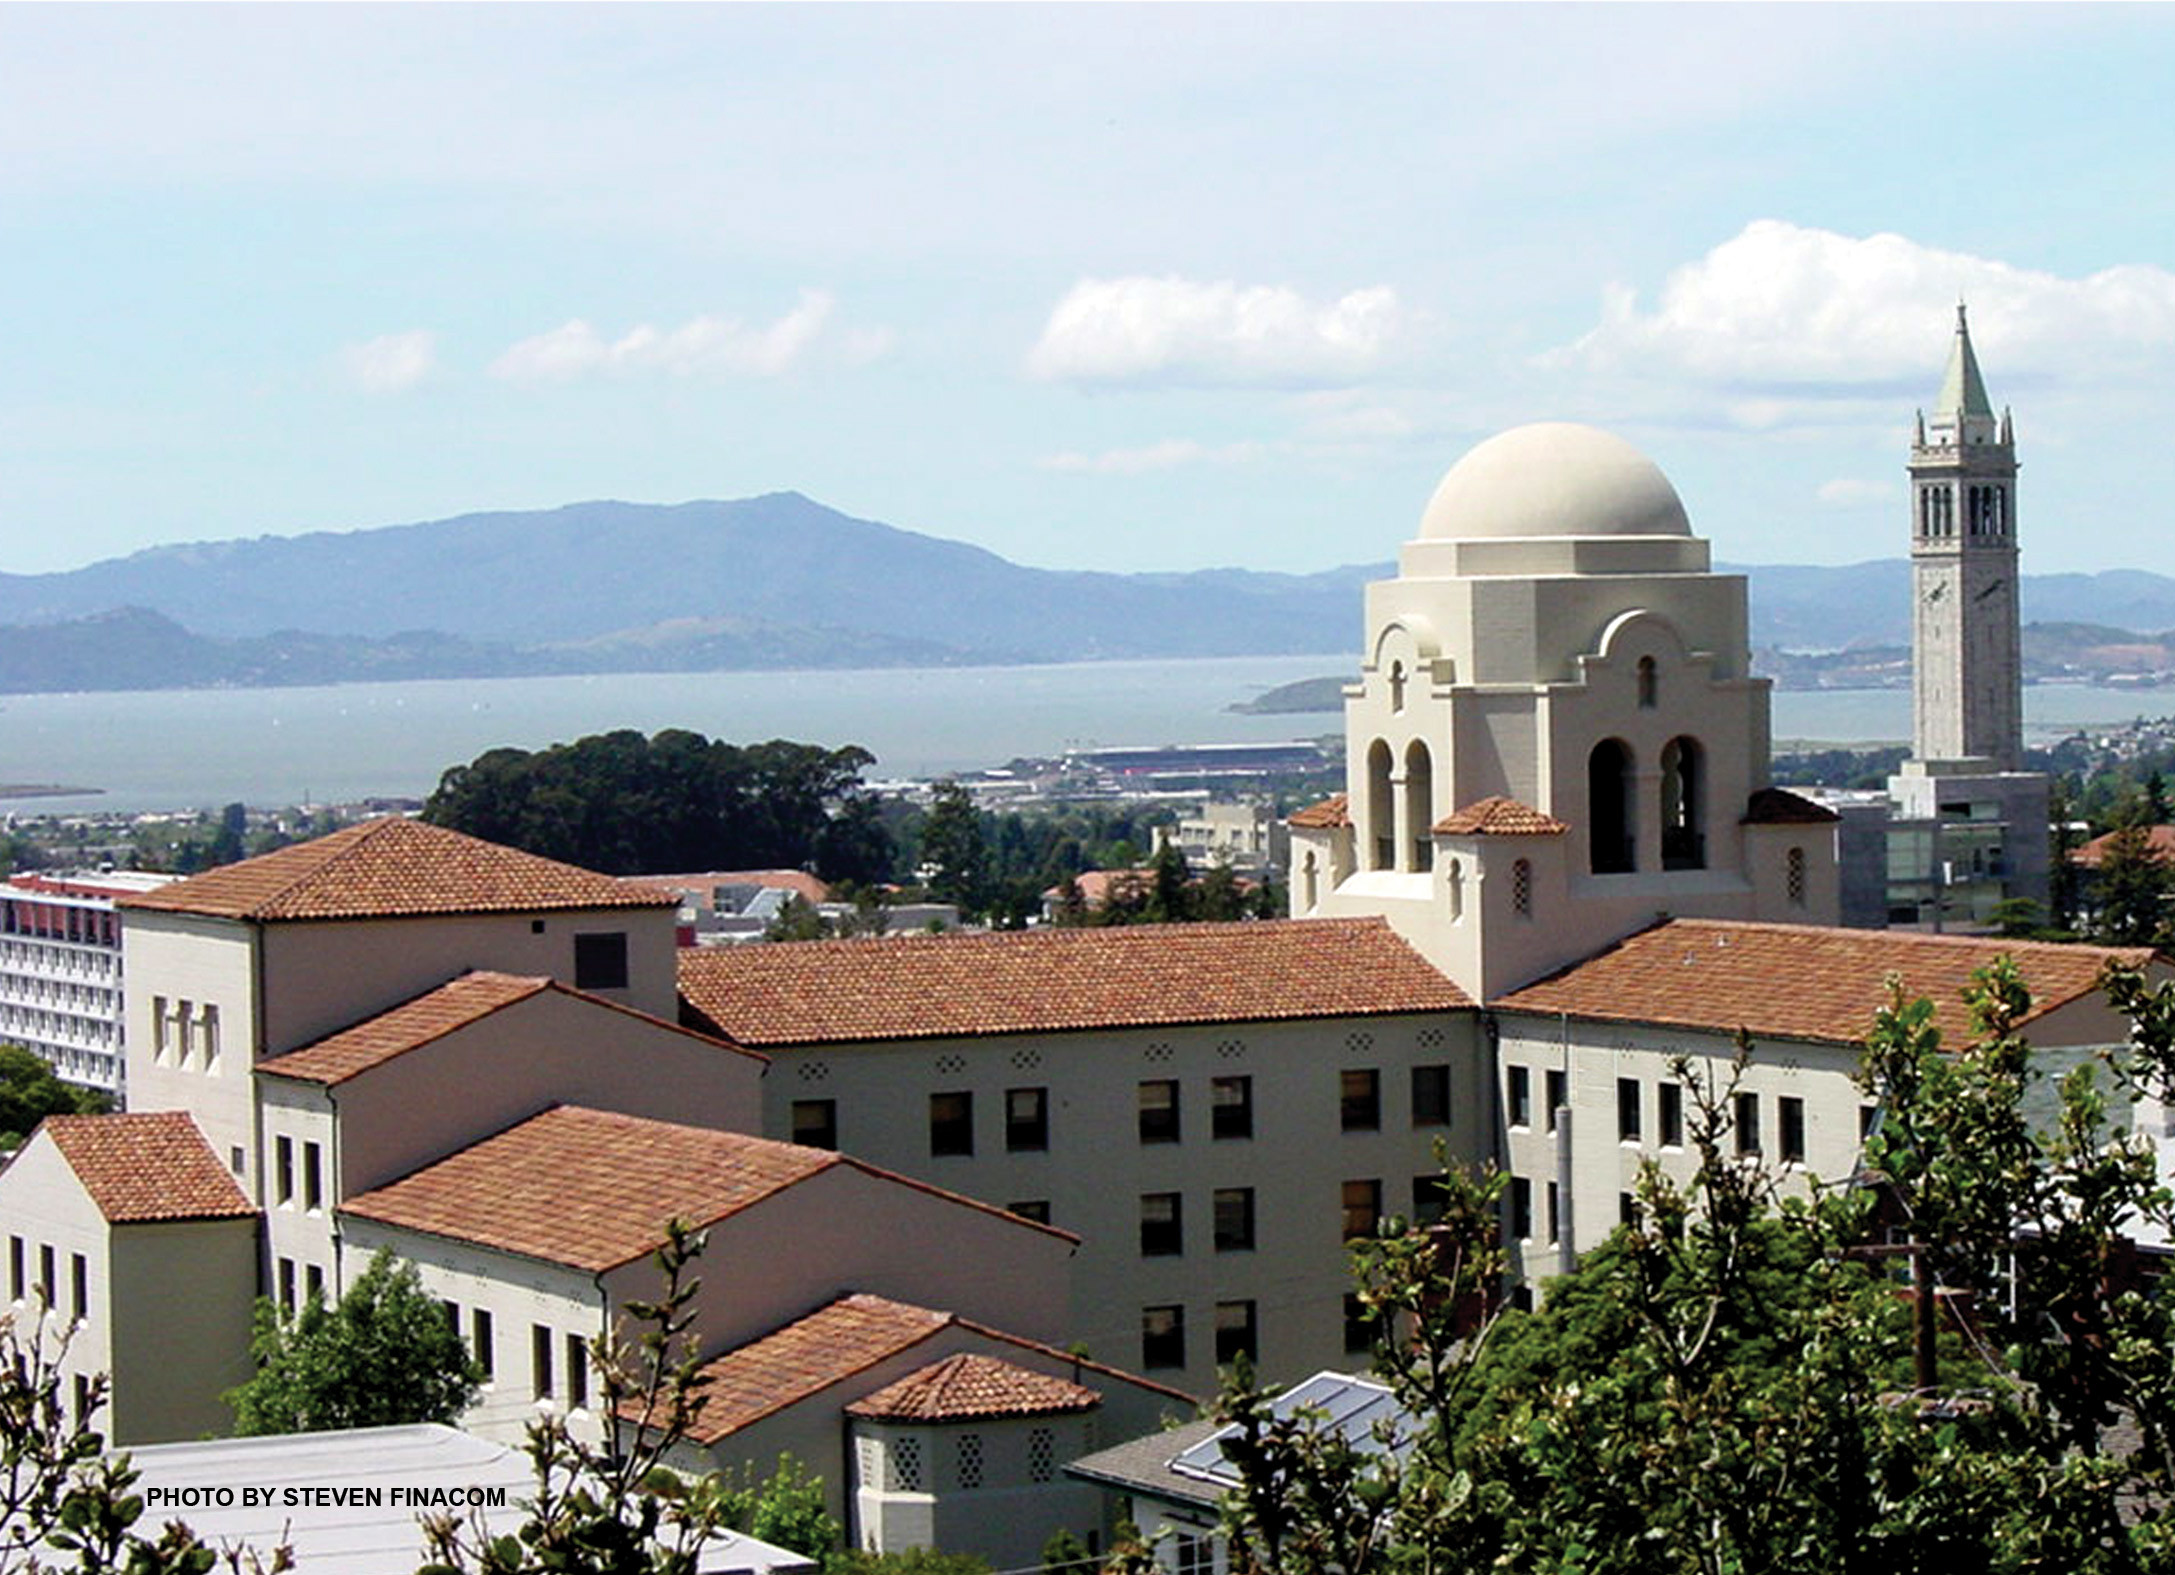 International House Uc Berkeley With Sf Bay And Campanile In Background Photo By Steven Finacom 2175x1575